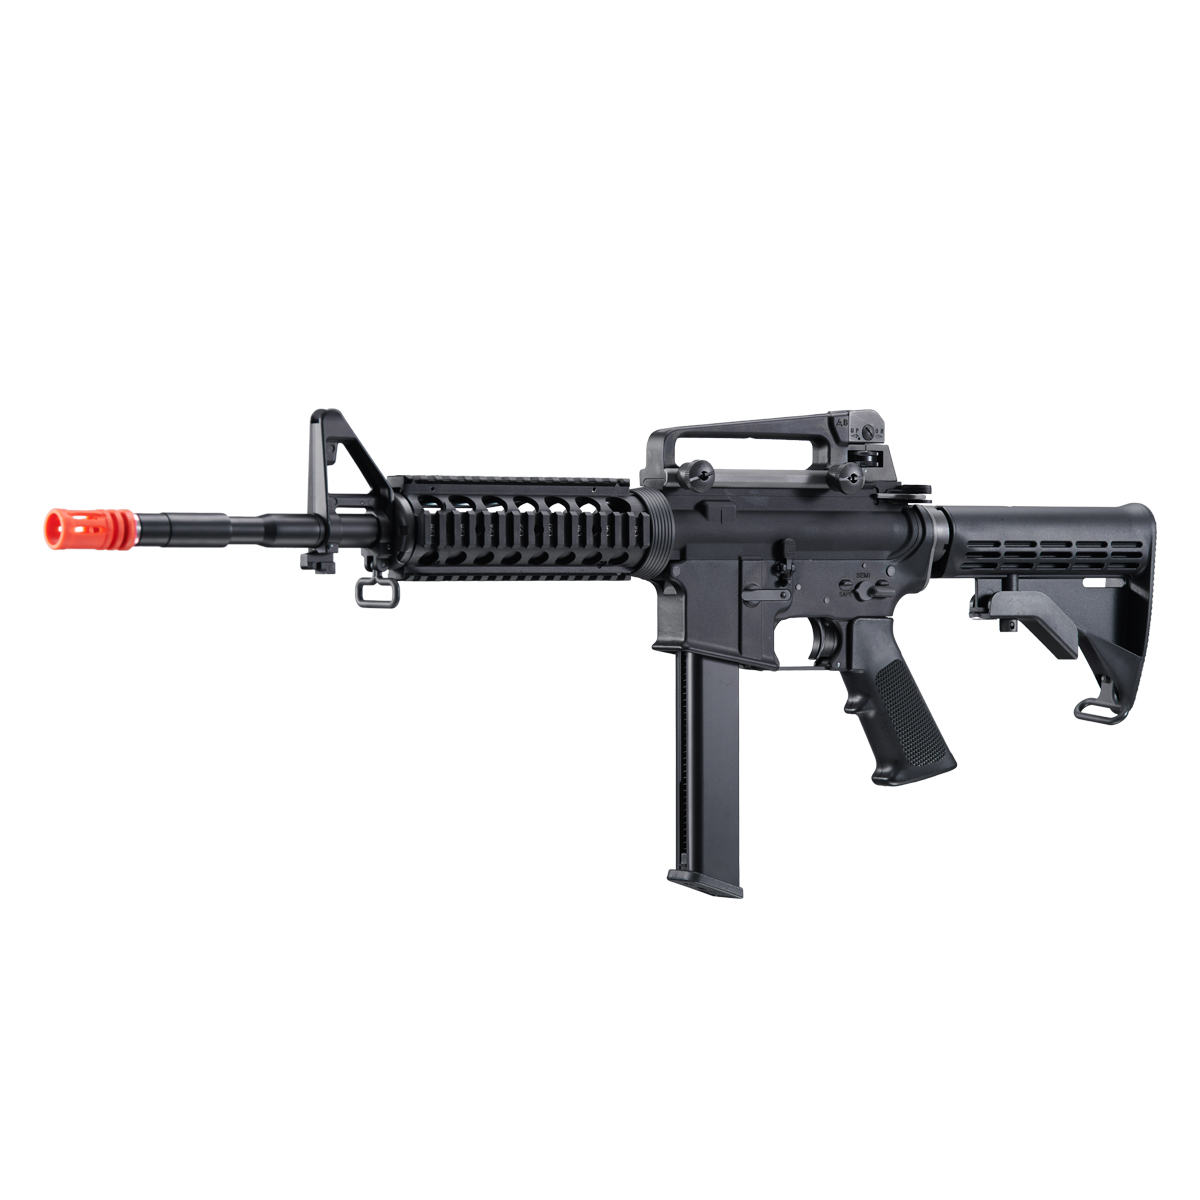 H&K G36C Competition Series Airsoft AEG Rifle by Umarex (Color: Black),  Airsoft Guns, Airsoft Electric Rifles -  Airsoft Superstore